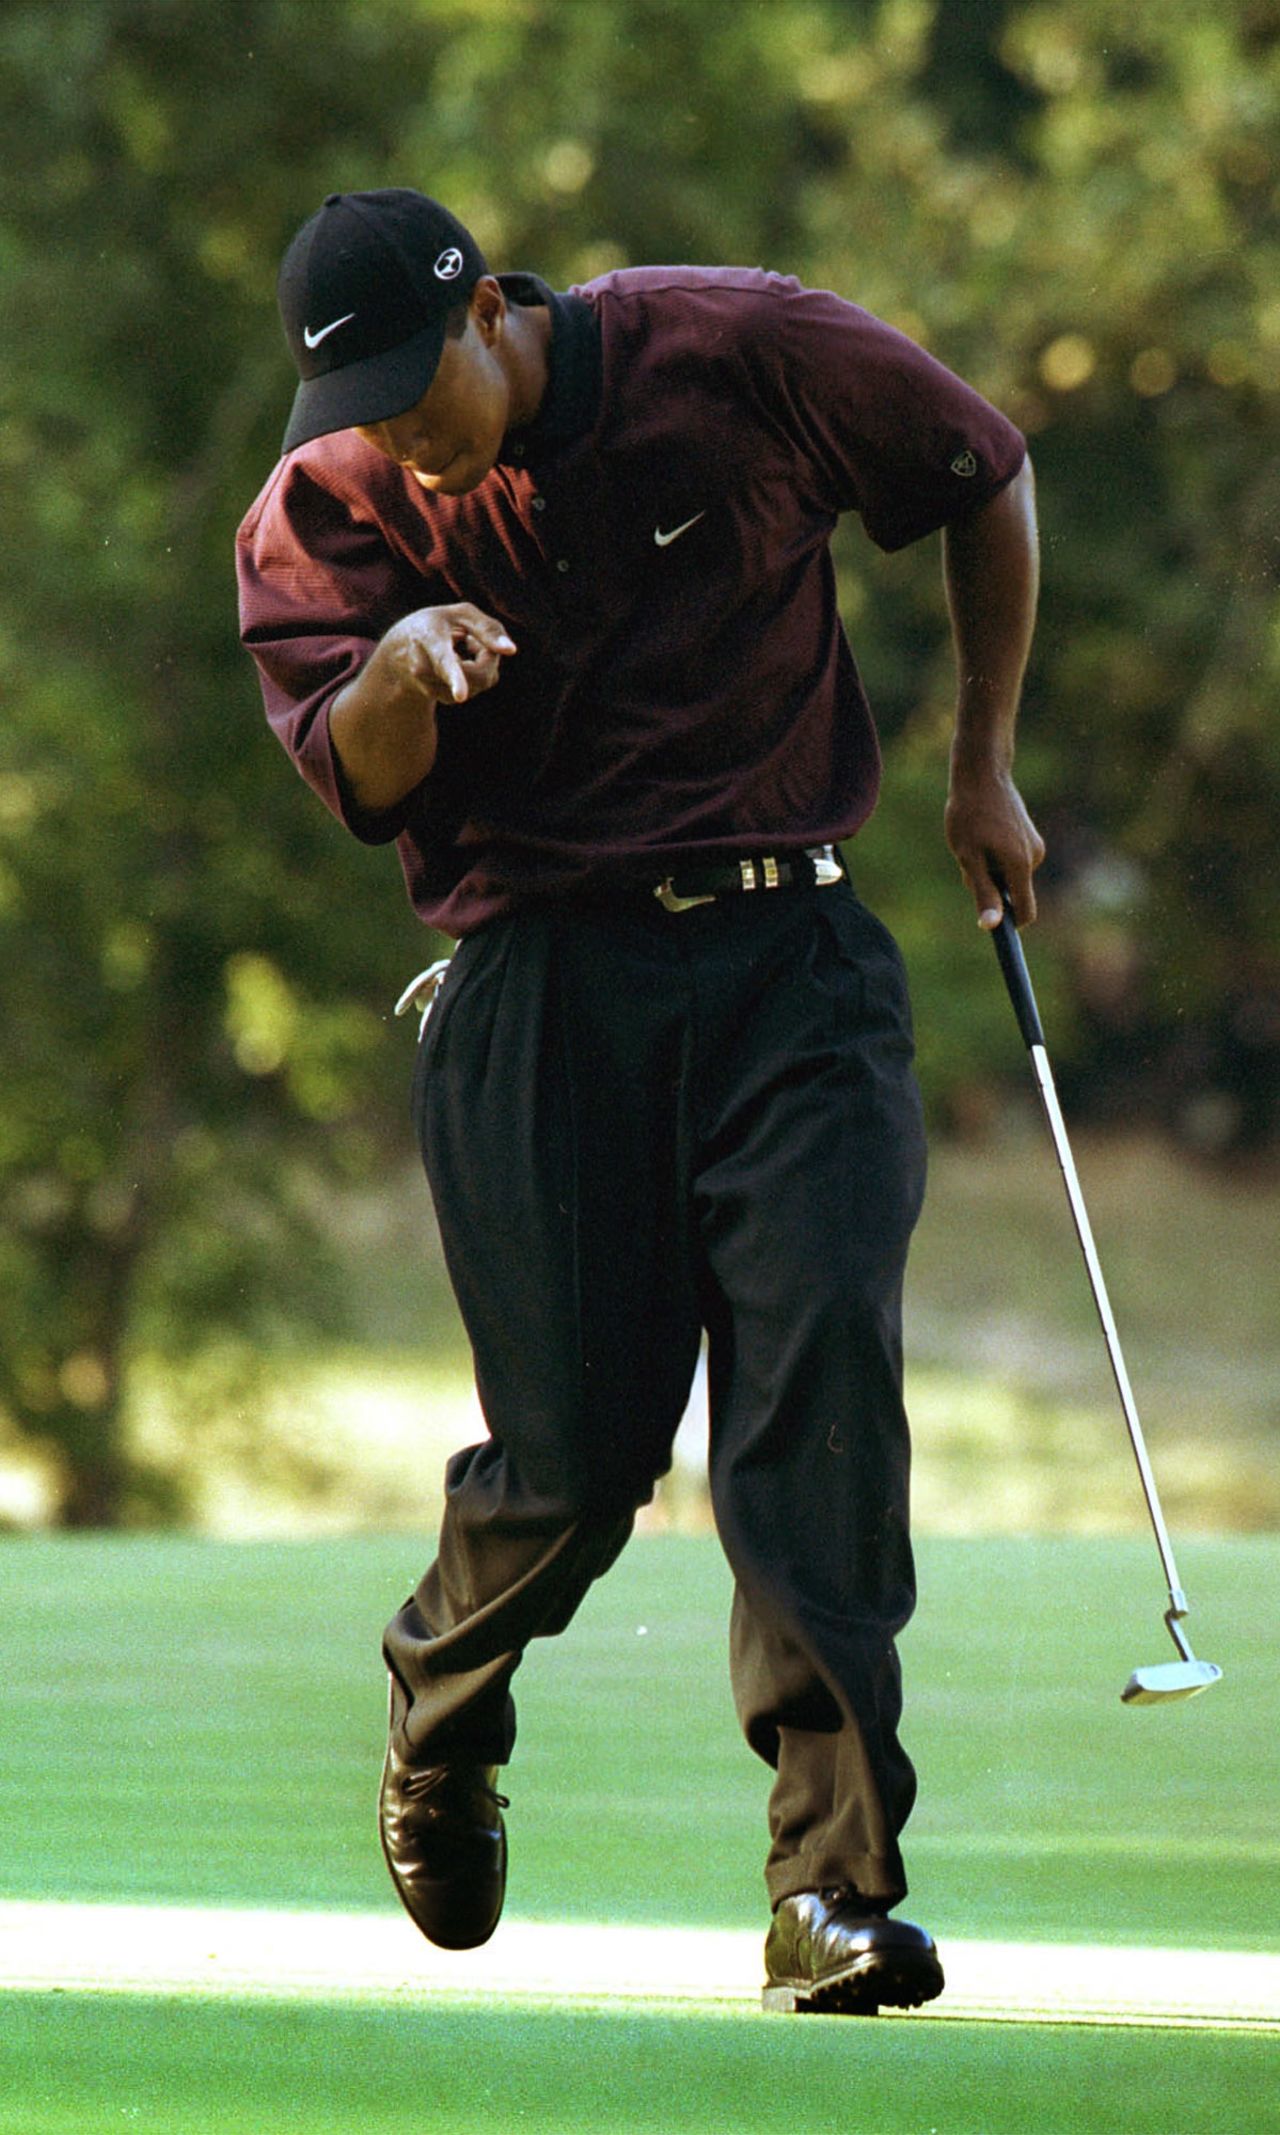 A pumped-up Tiger Woods holes a crucial putt during the 2000 U.S. PGA Championship playoff against Bob May at Valhalla. <br /><br />"This picture captured Tiger Woods at his absolute peak," Cannon said. <br /><br />"I never get tired of seeing Tiger will the ball into the hole, and this picture captures the way he almost appears to tell his ball what to do."